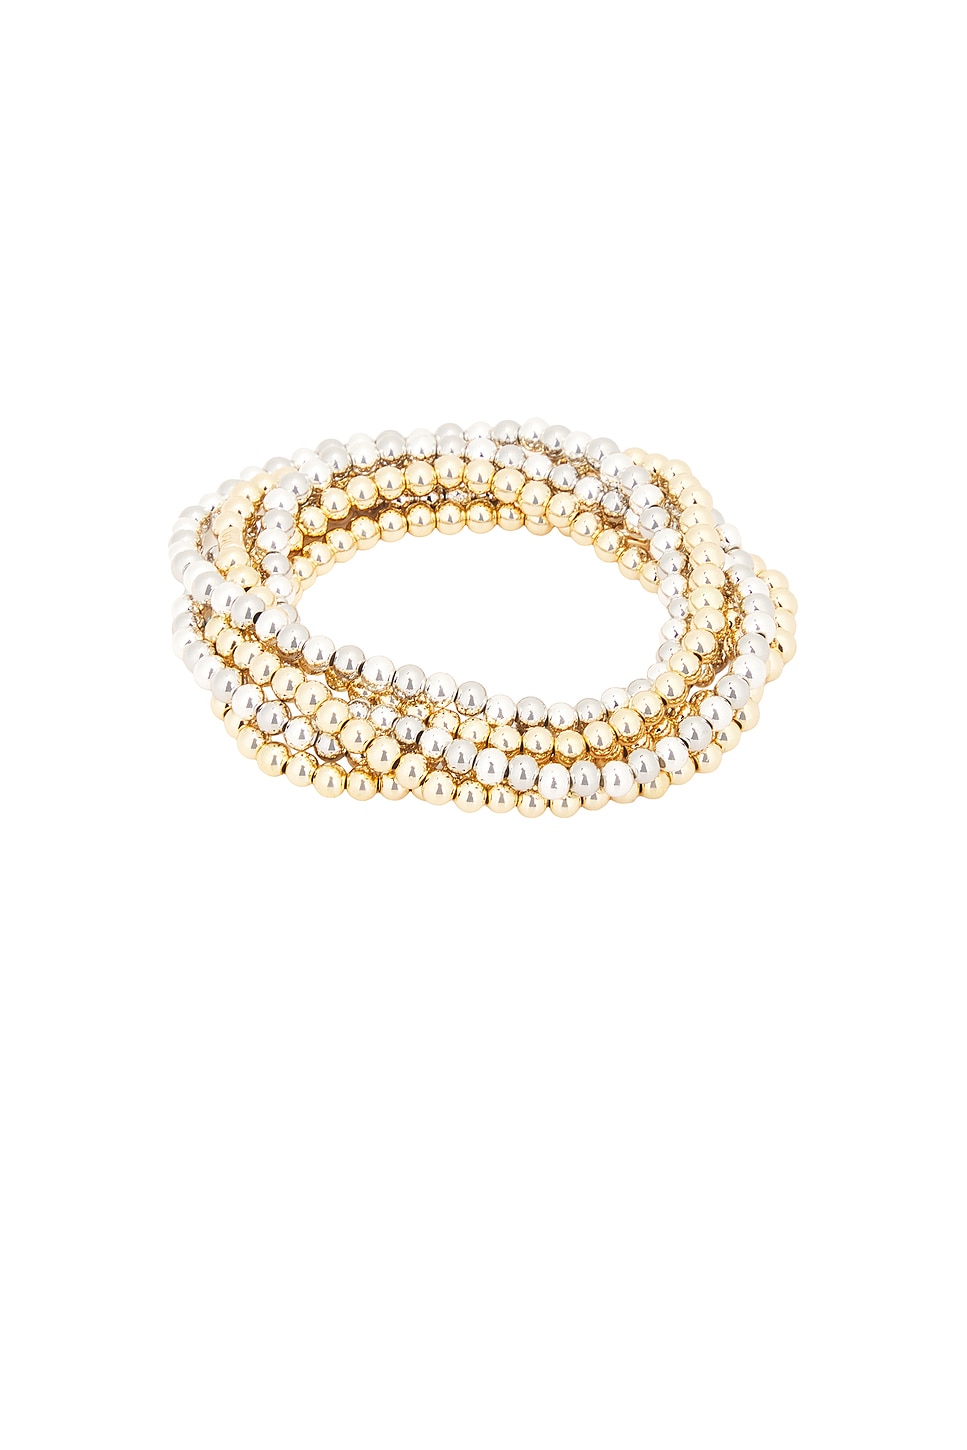 Image 1 of Roxanne Assoulin Mixed Metals Baby Bubble Set Bracelet in Gold & Silver